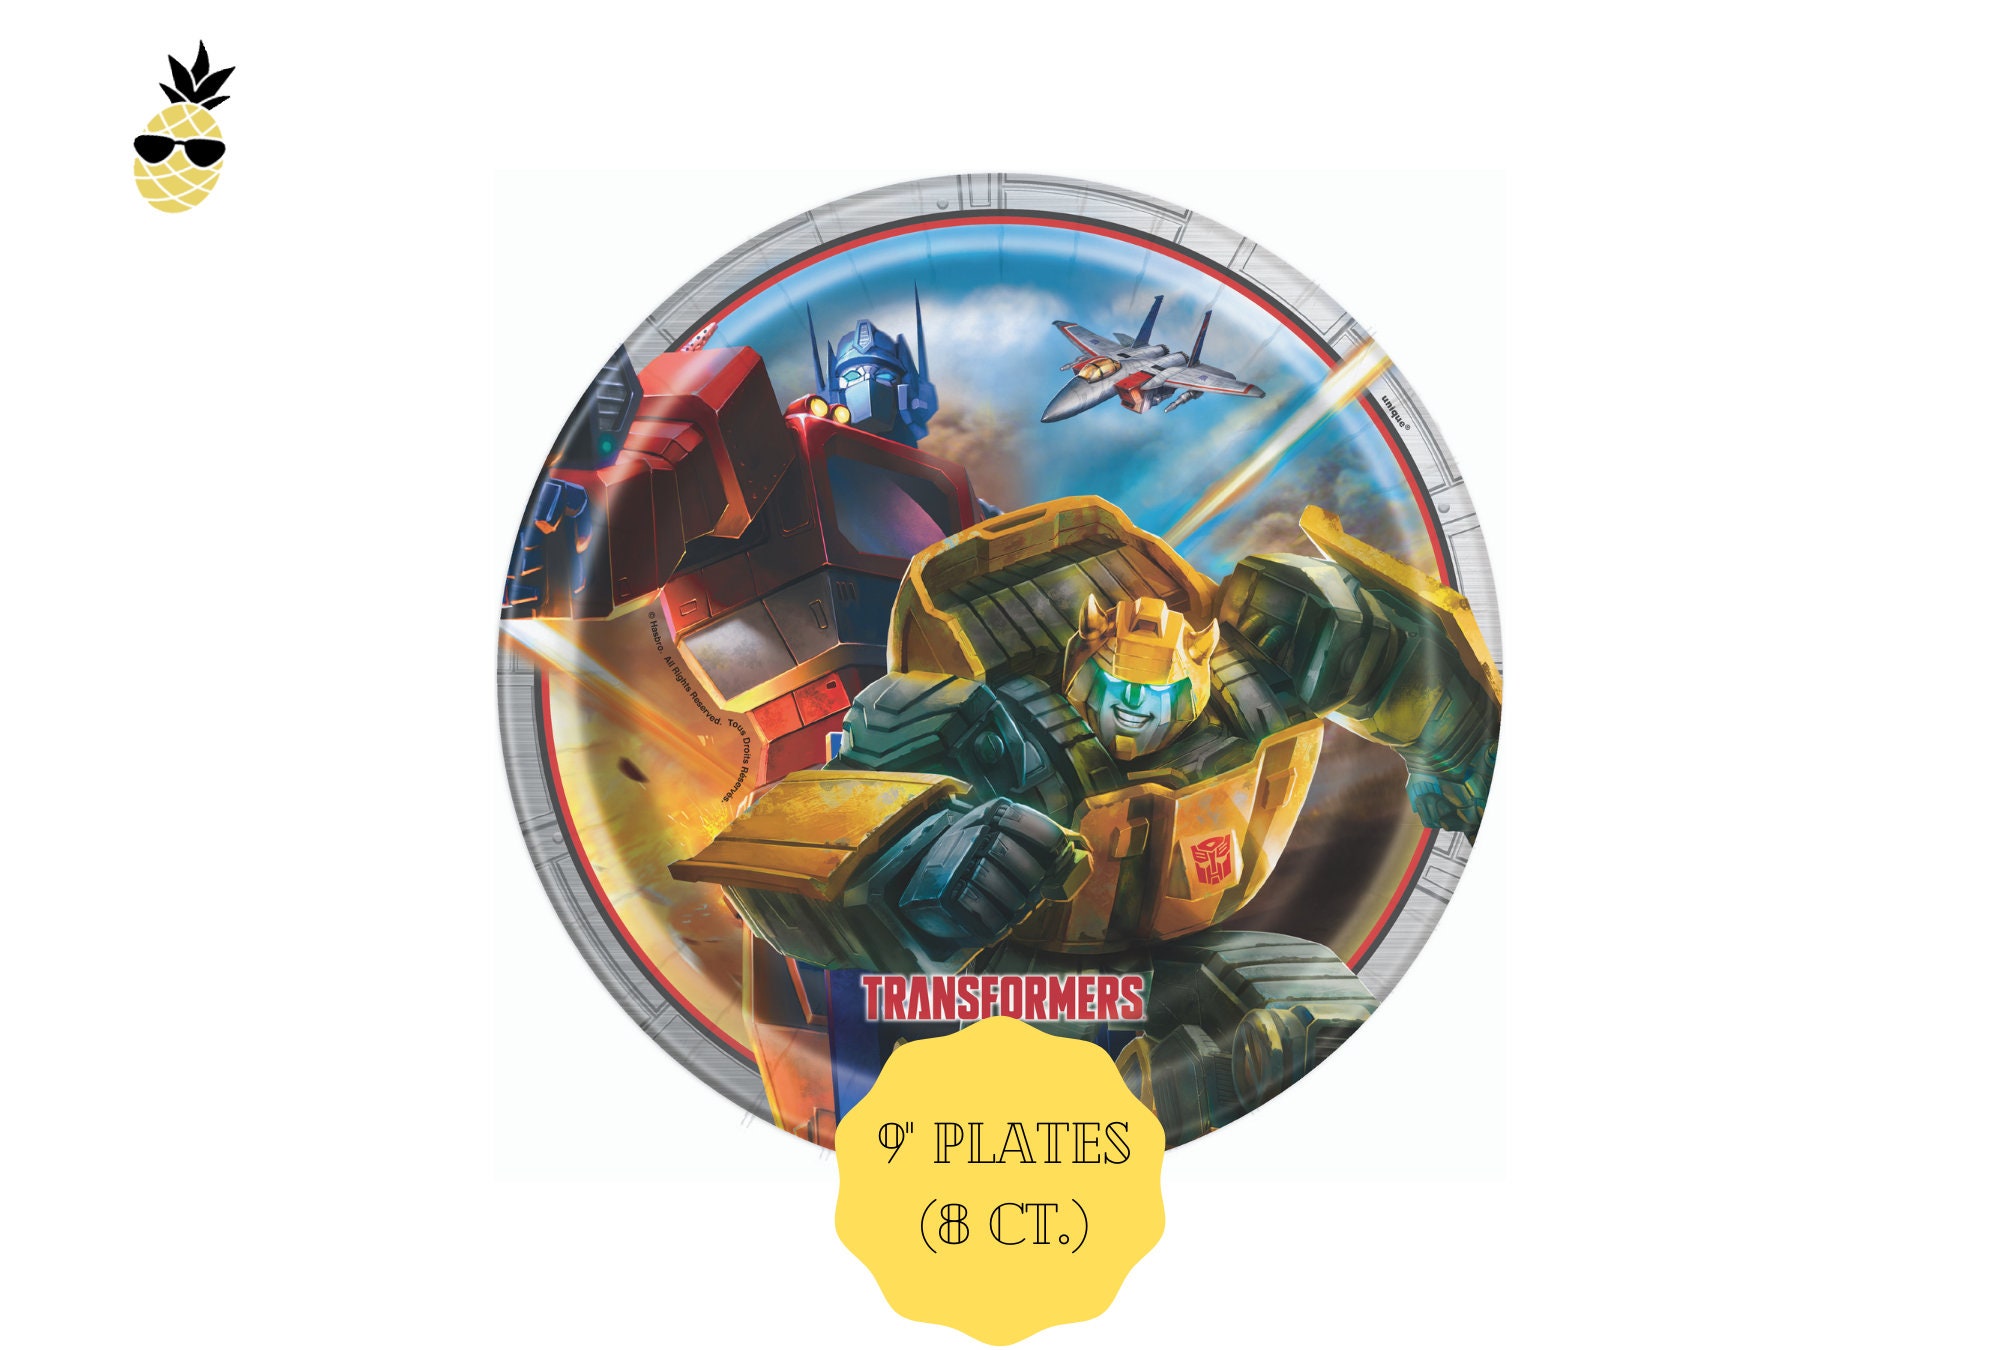 Original Version Transformers Birthday Party Supplies Set Plates Napkins Cups Kit for 16 by Designware 